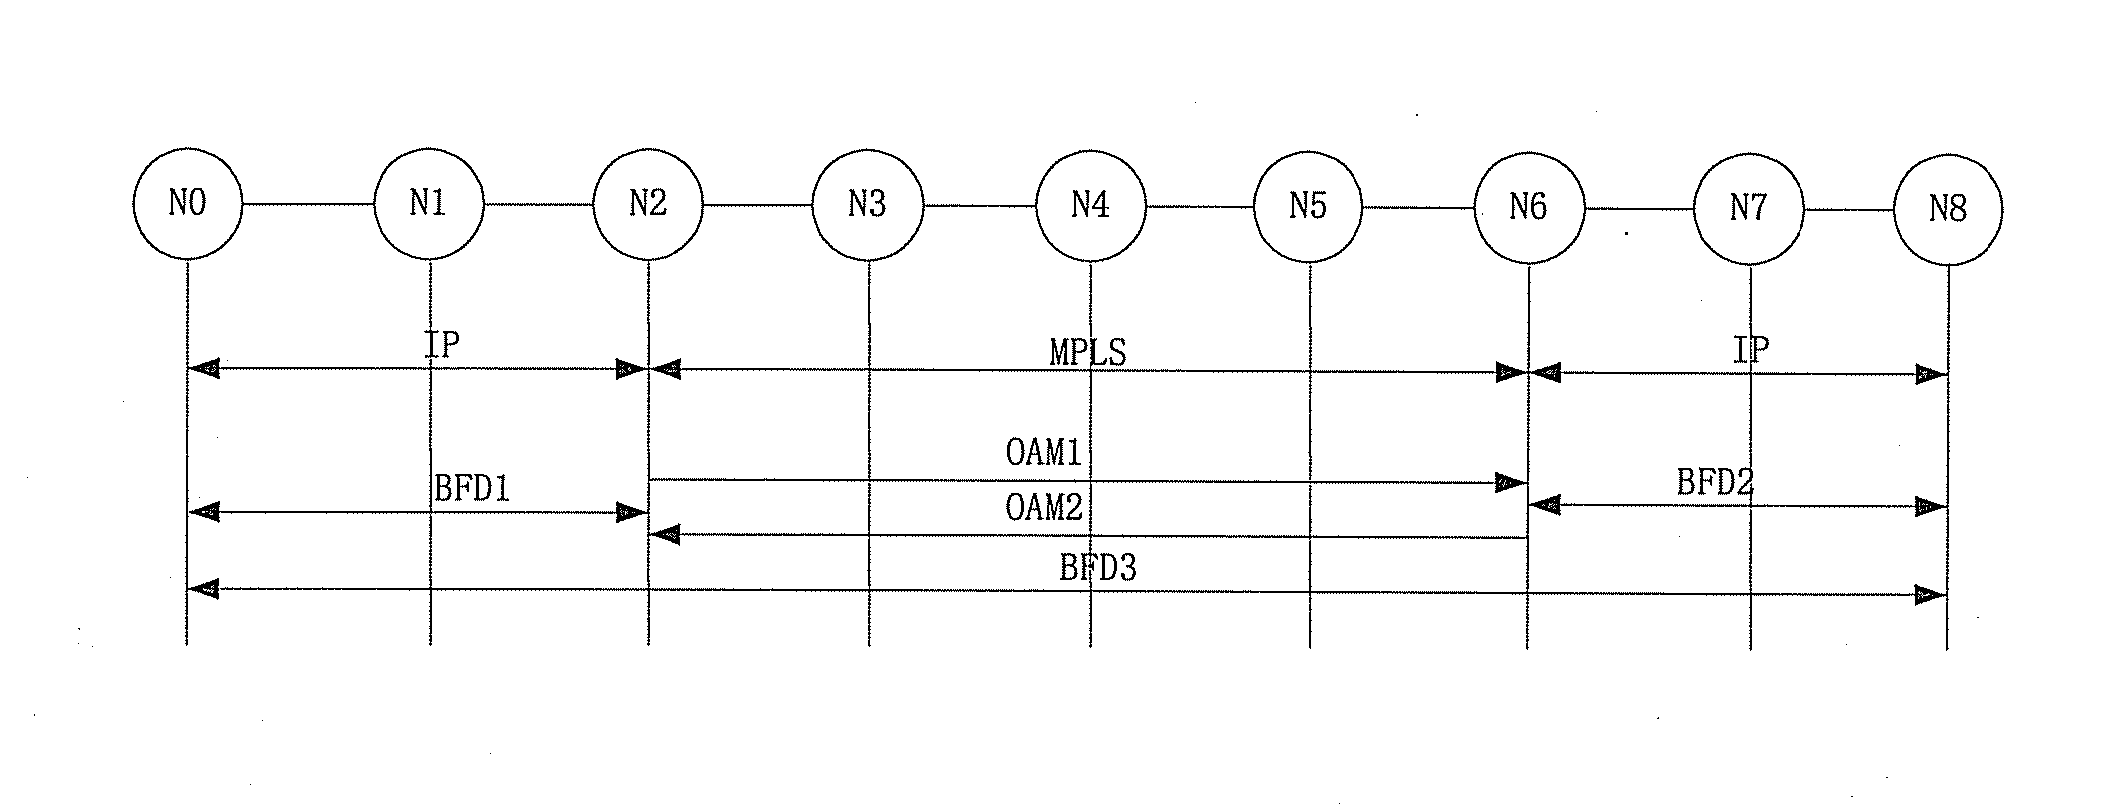 Method and system for detecting link failure between nodes in a hybrid network